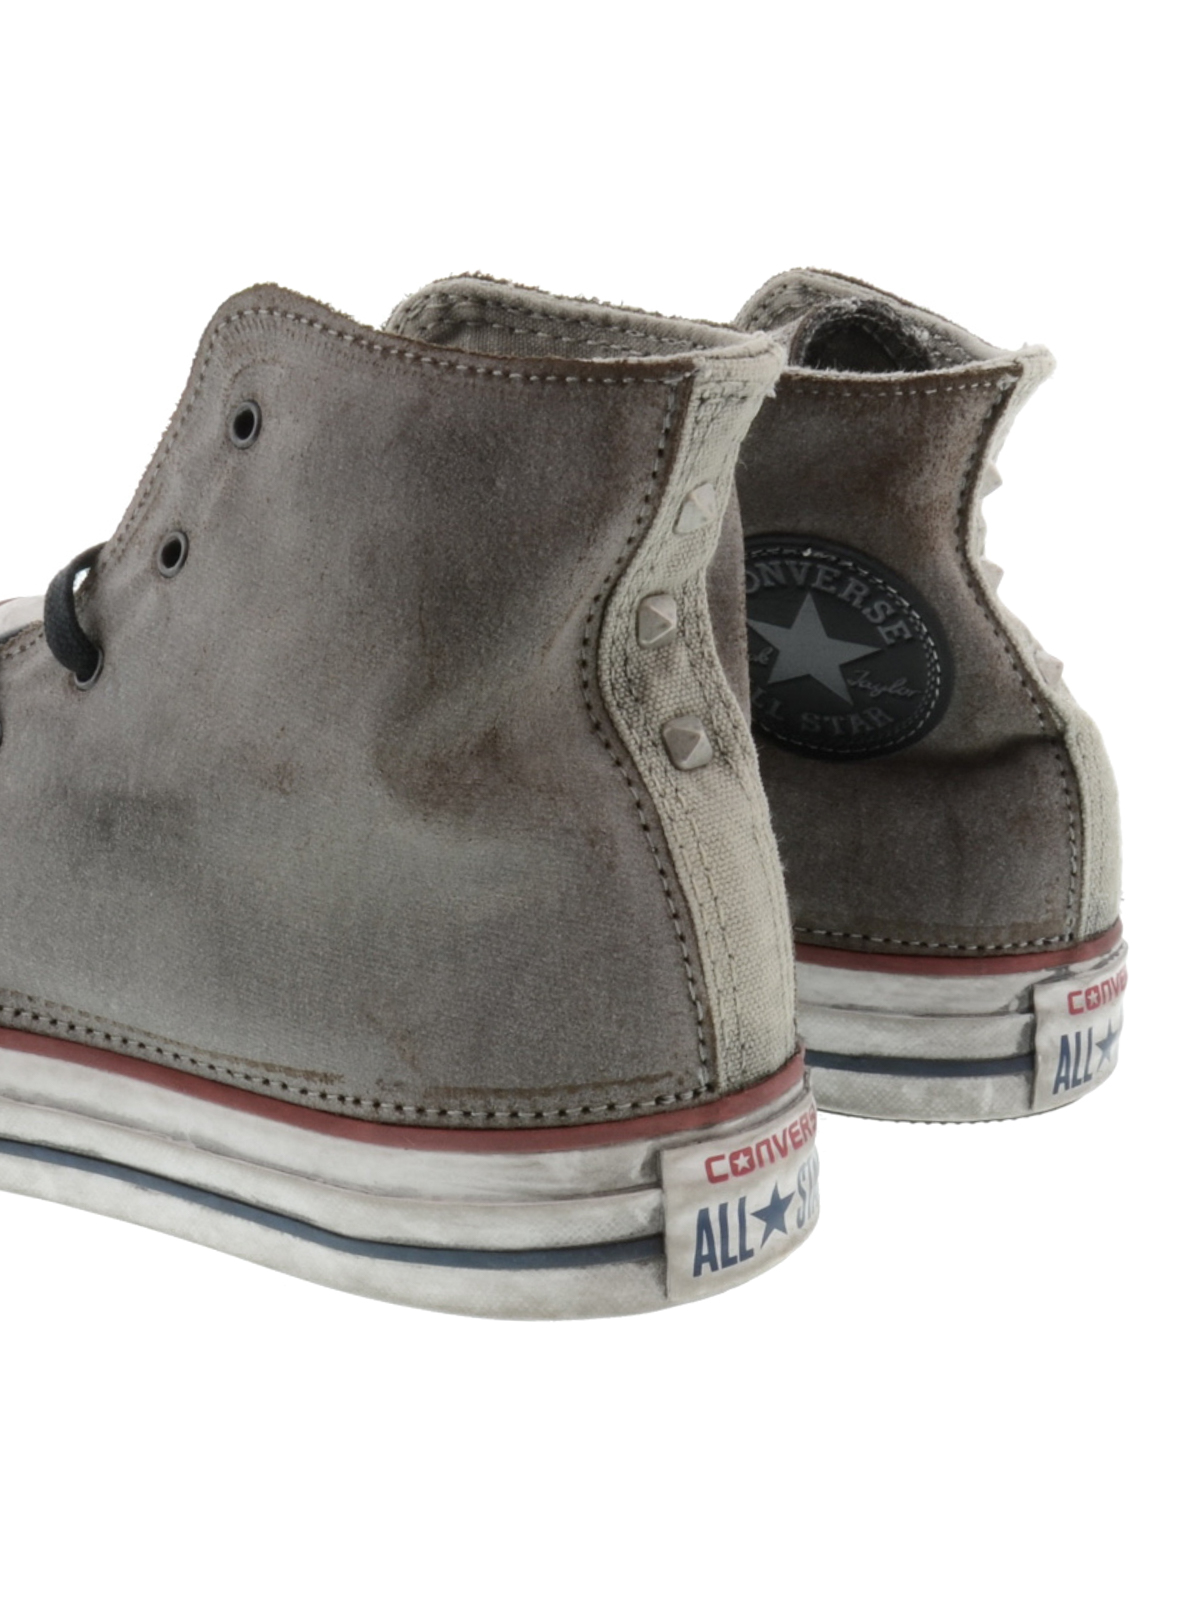 converse pelle limited edition